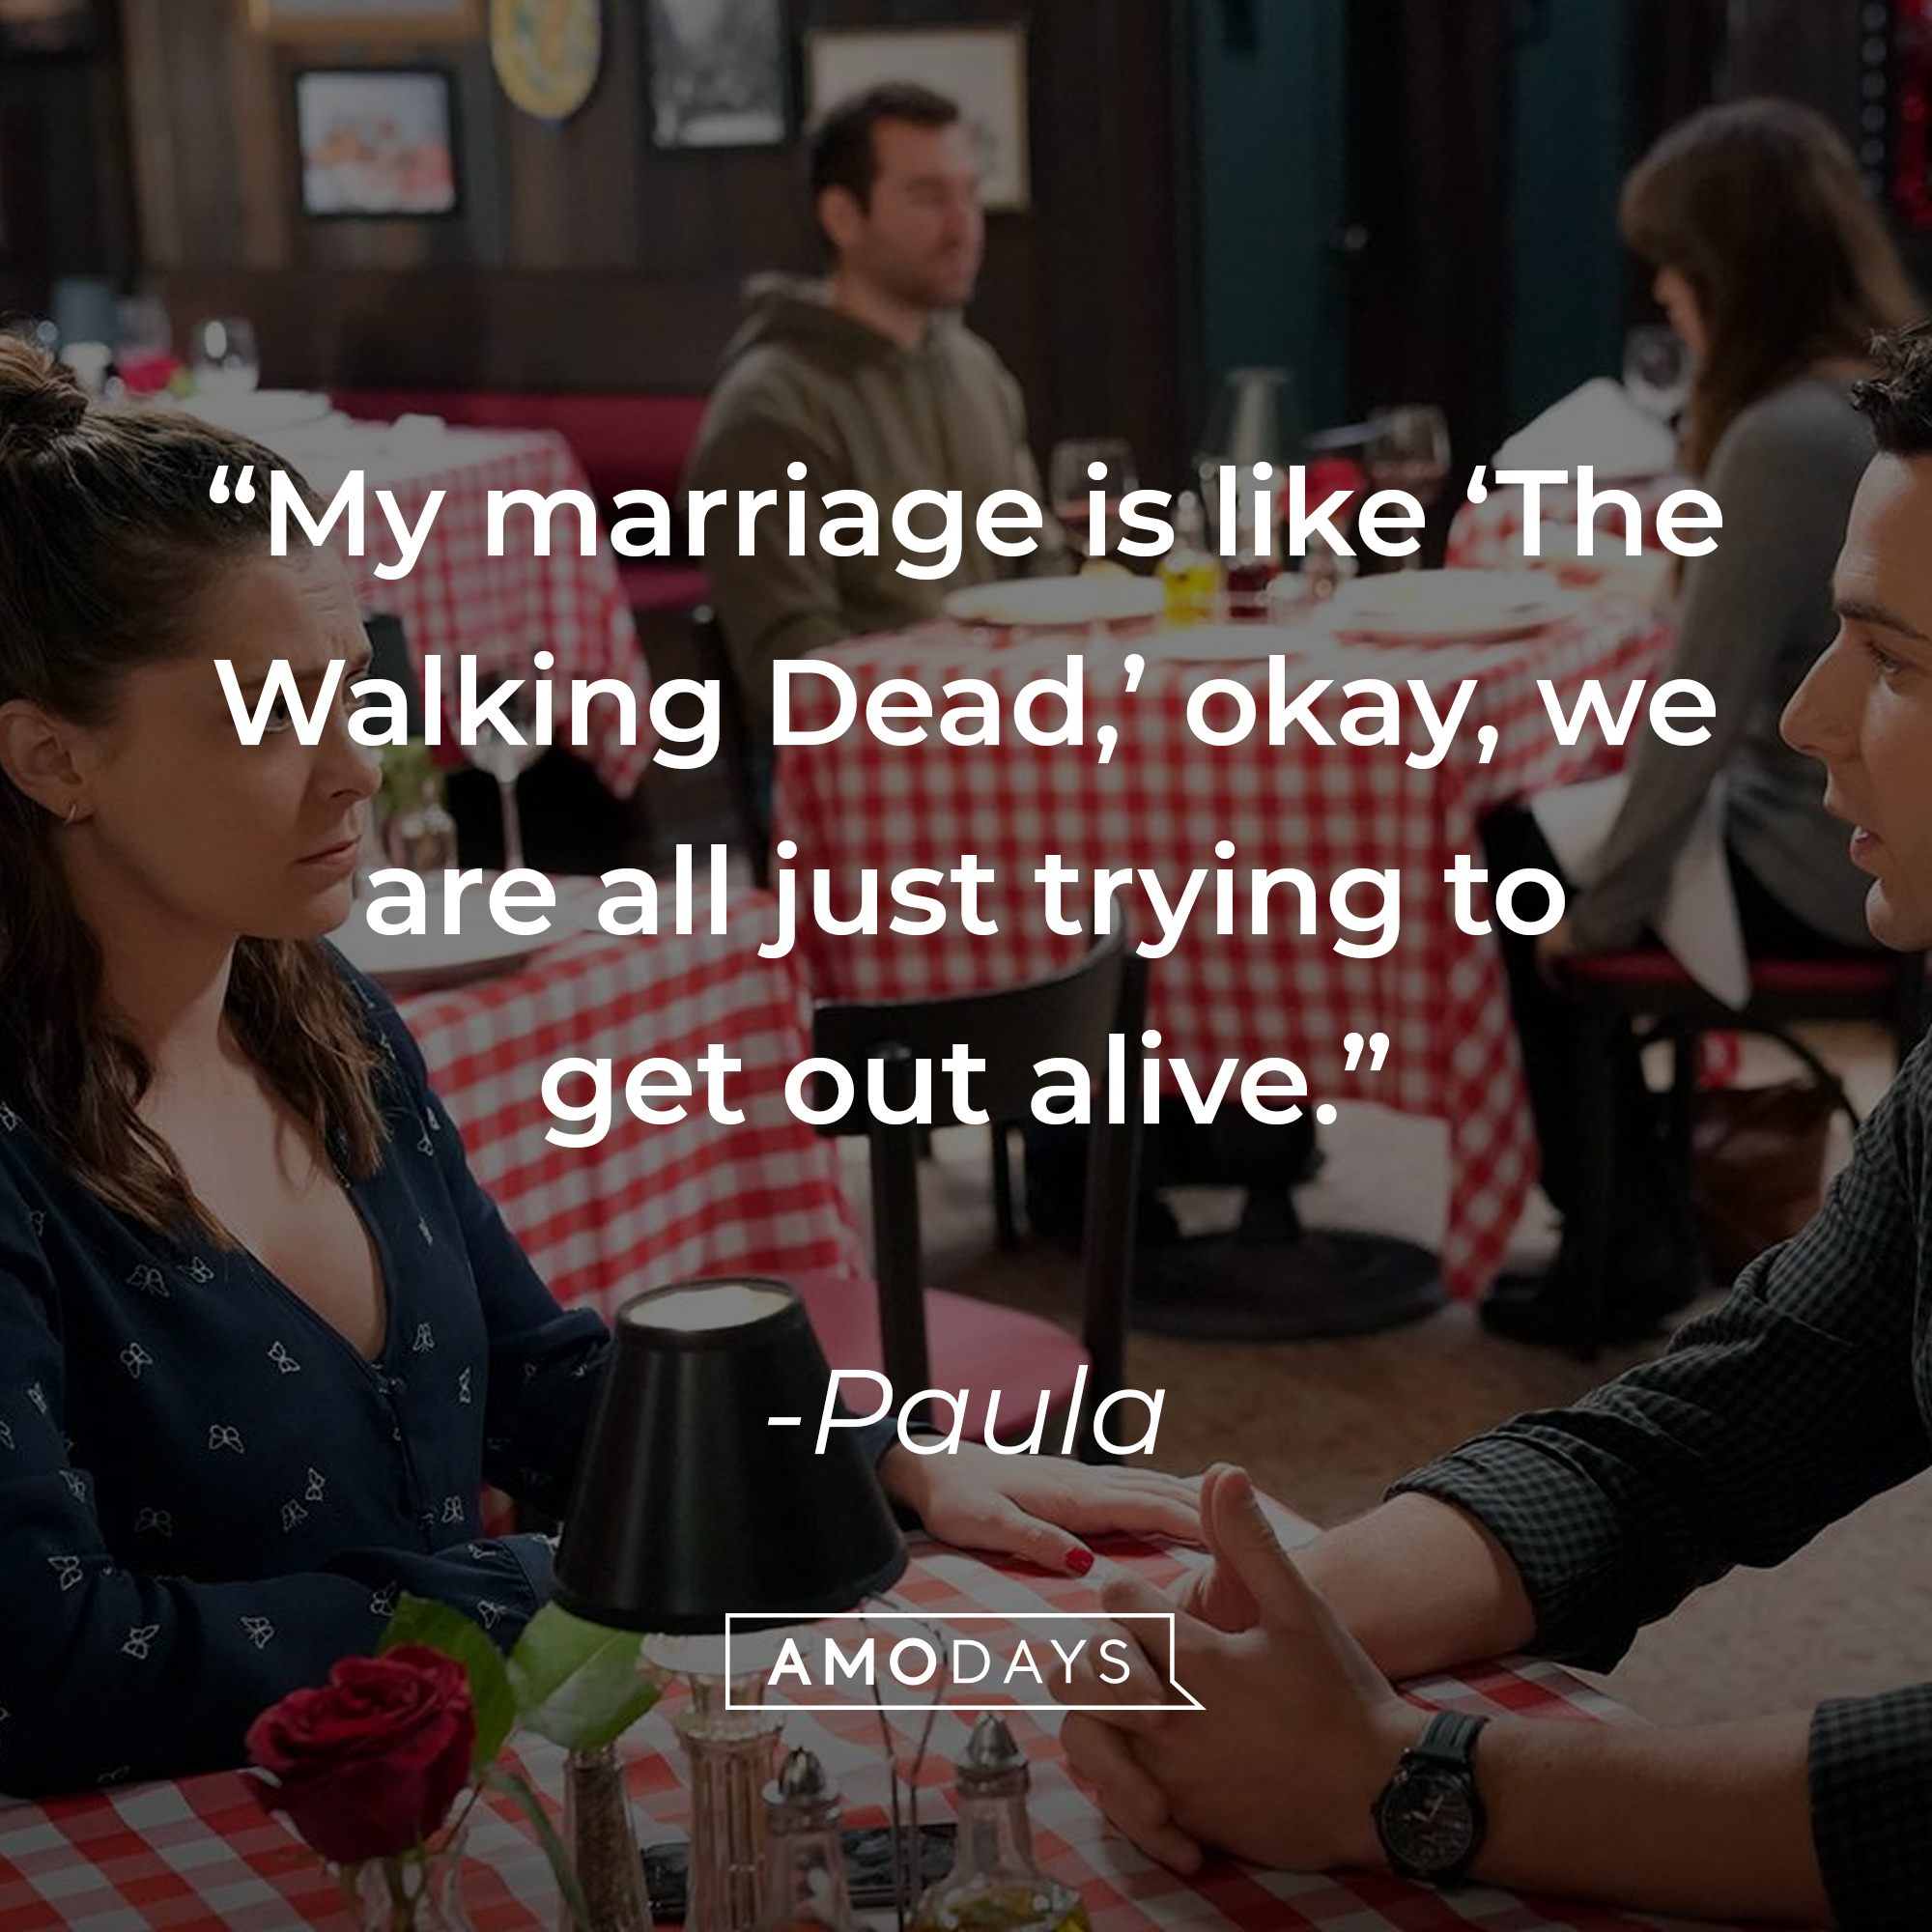 Rebecca and Greg, with Paula’s quote: “My marriage is like ‘The Walking Dead,’ okay, we are all just trying to get out alive.”  |Source: facebook.com/crazyxgf